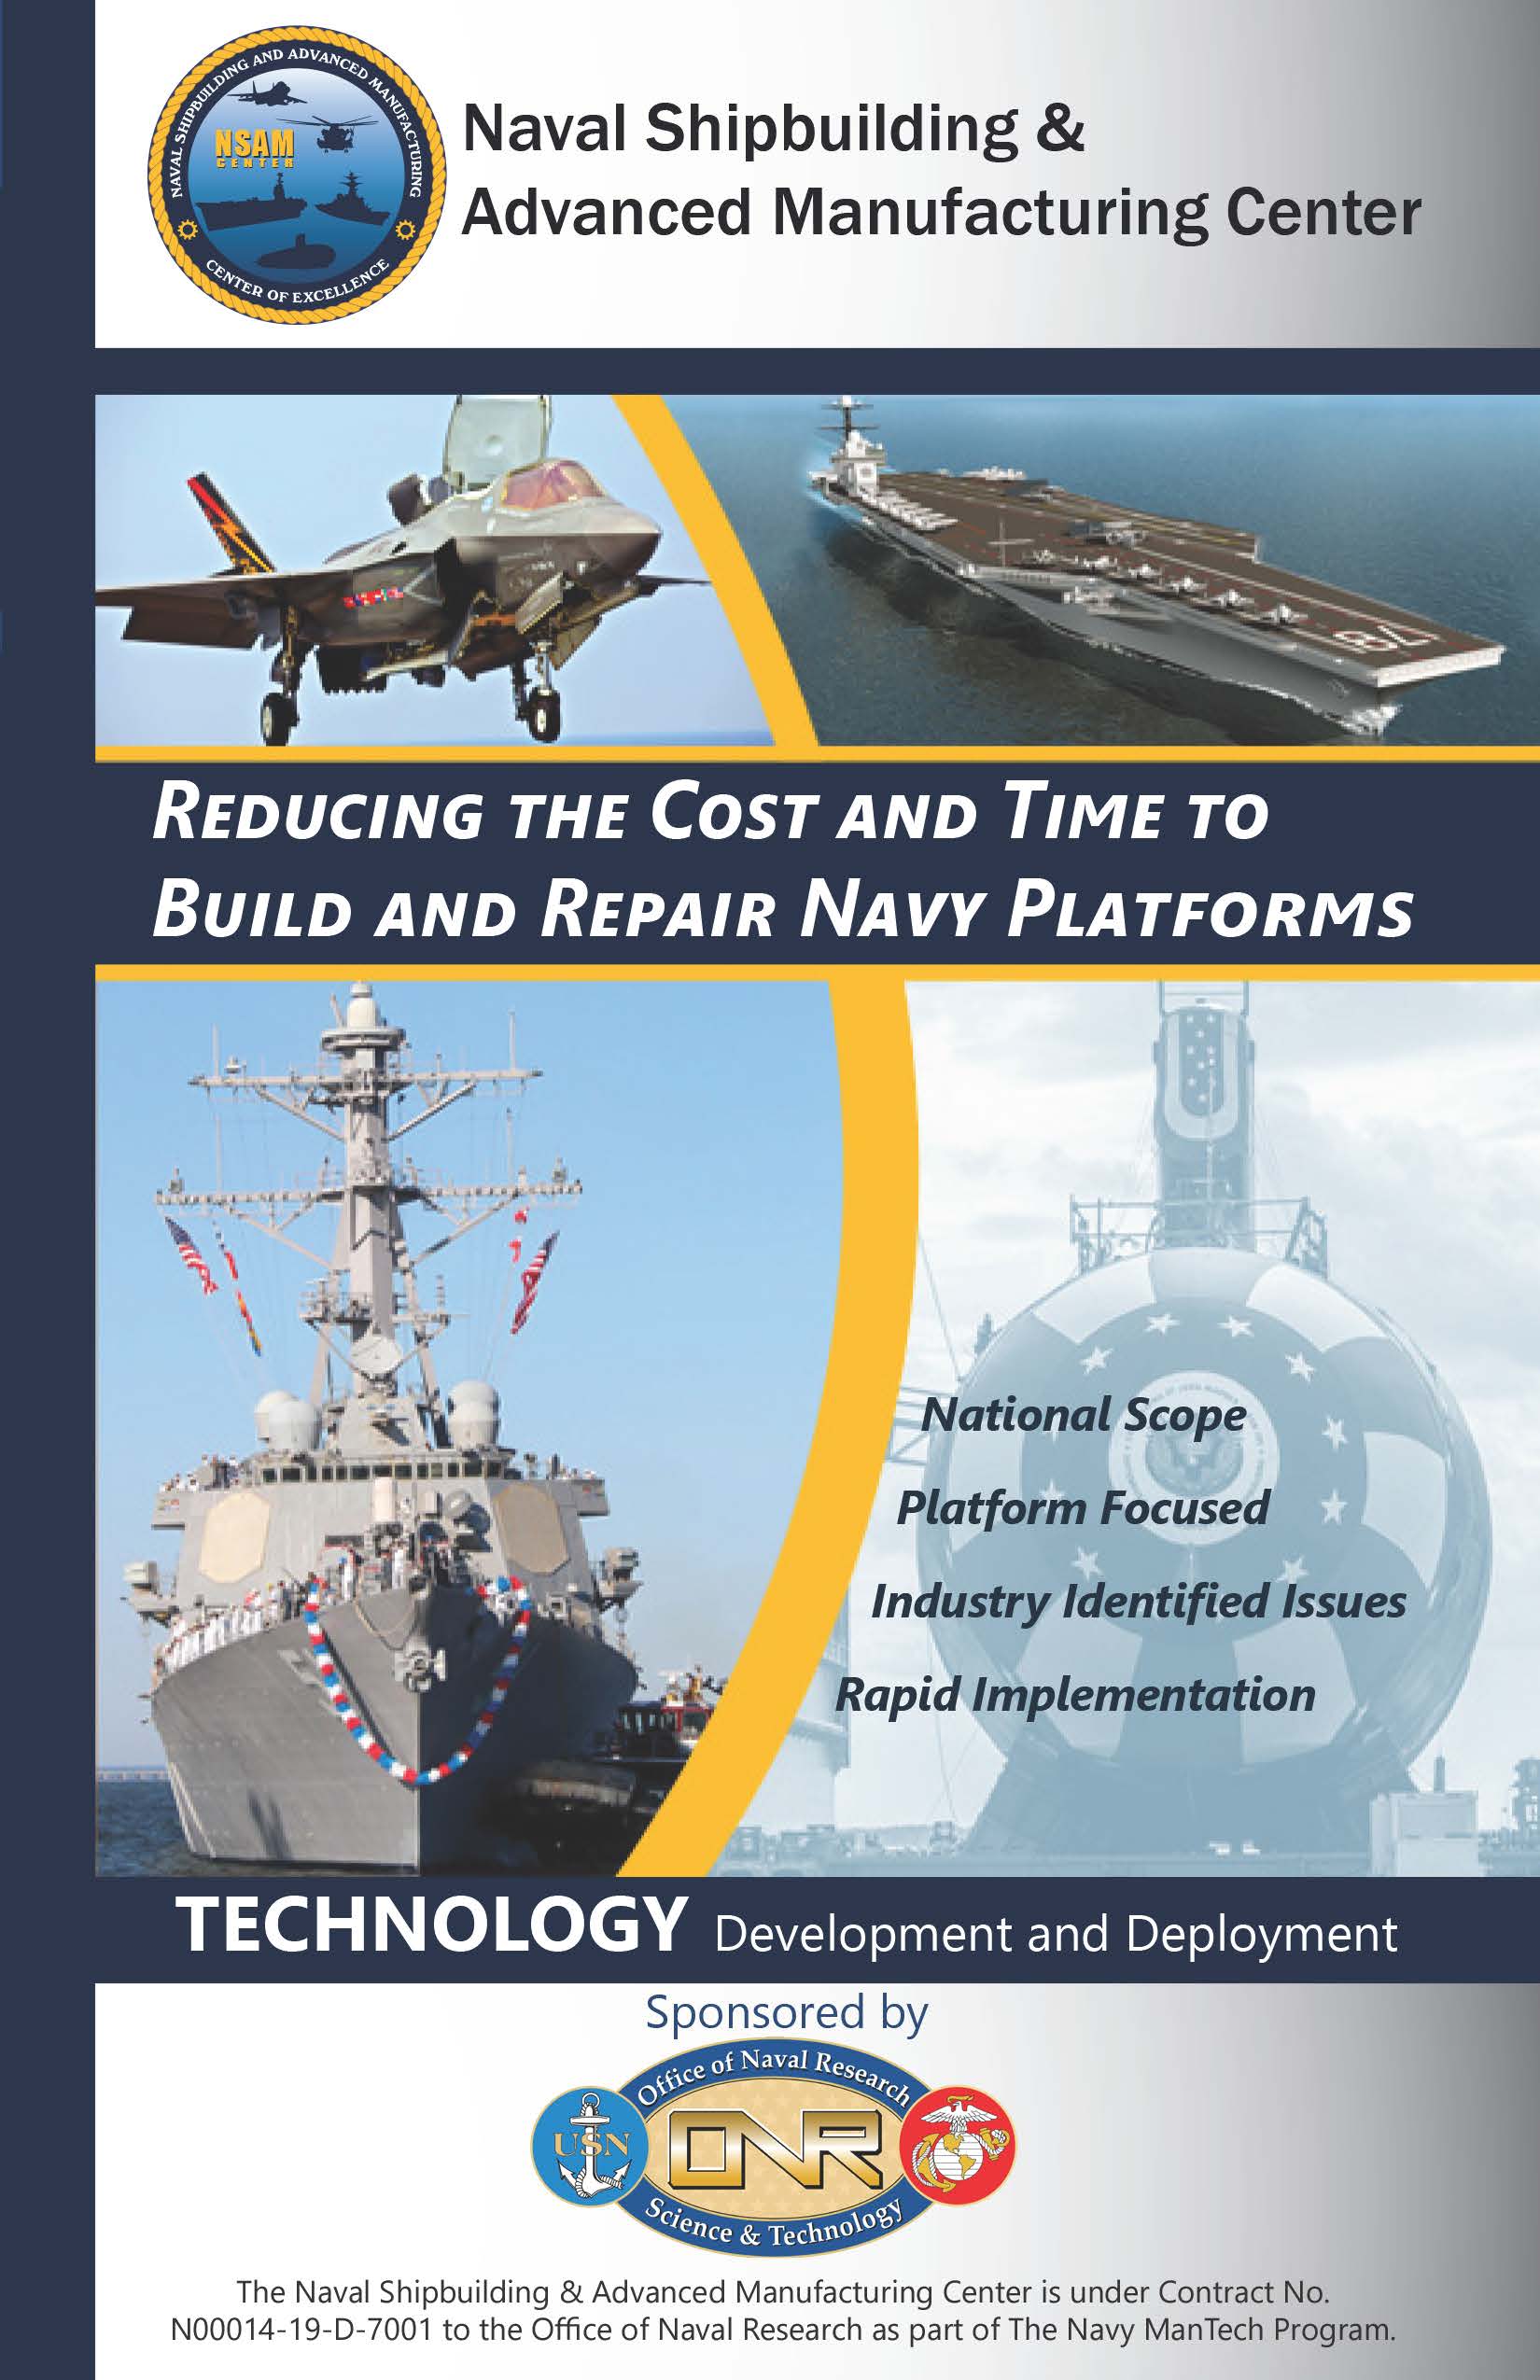 NSAM Brochure Cover: Reducing the Cost and Time to Build and Repair Navy Platforms; Sponsored by ONR (Official Naval Research Science & Technology)